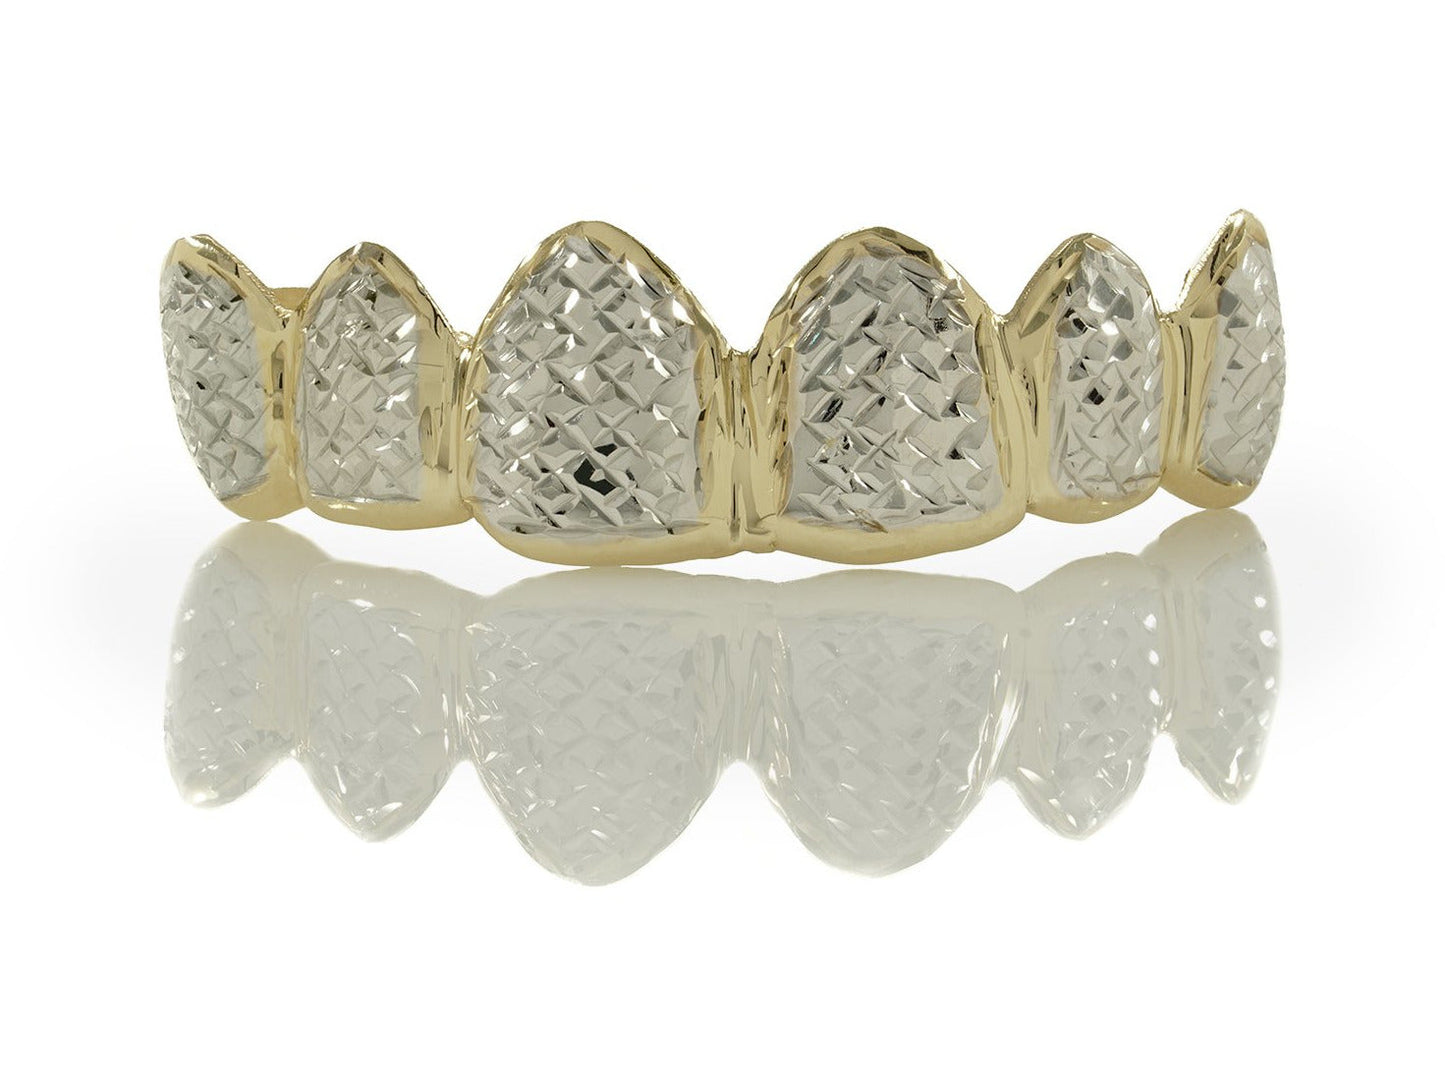 Top and Bottom Combo Deal - Two Tone Box Diamond Cut Grillz [SG010]